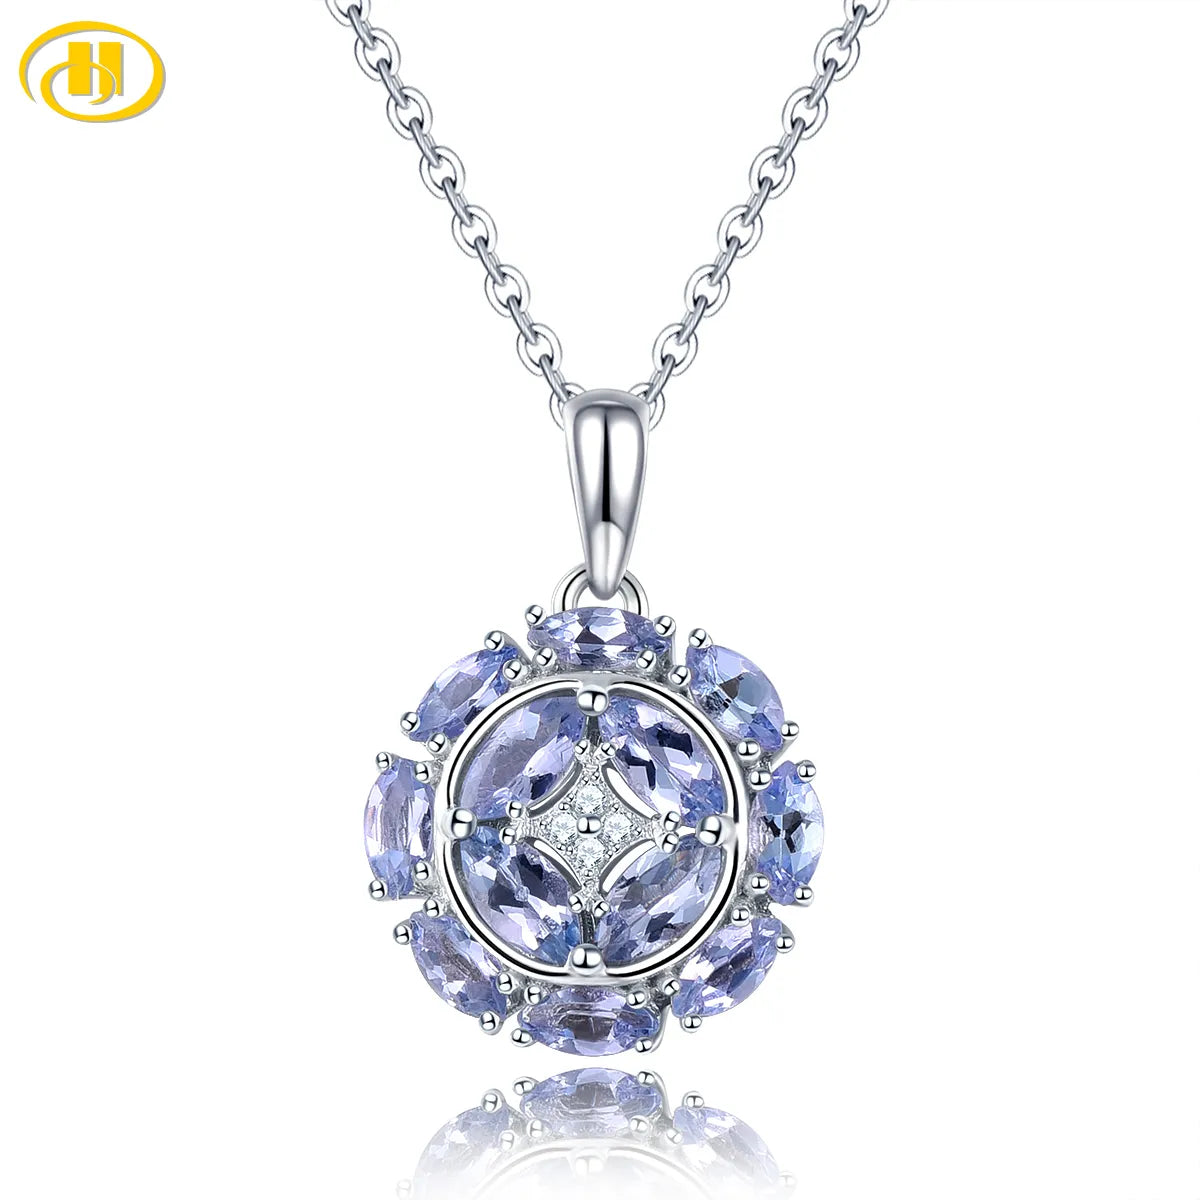 Natural Tanzanite Solid Silver Pendants 1.3 Carats Genuine Gemstone Women's Classic Charming Style Jewelry Gift for Anniversary